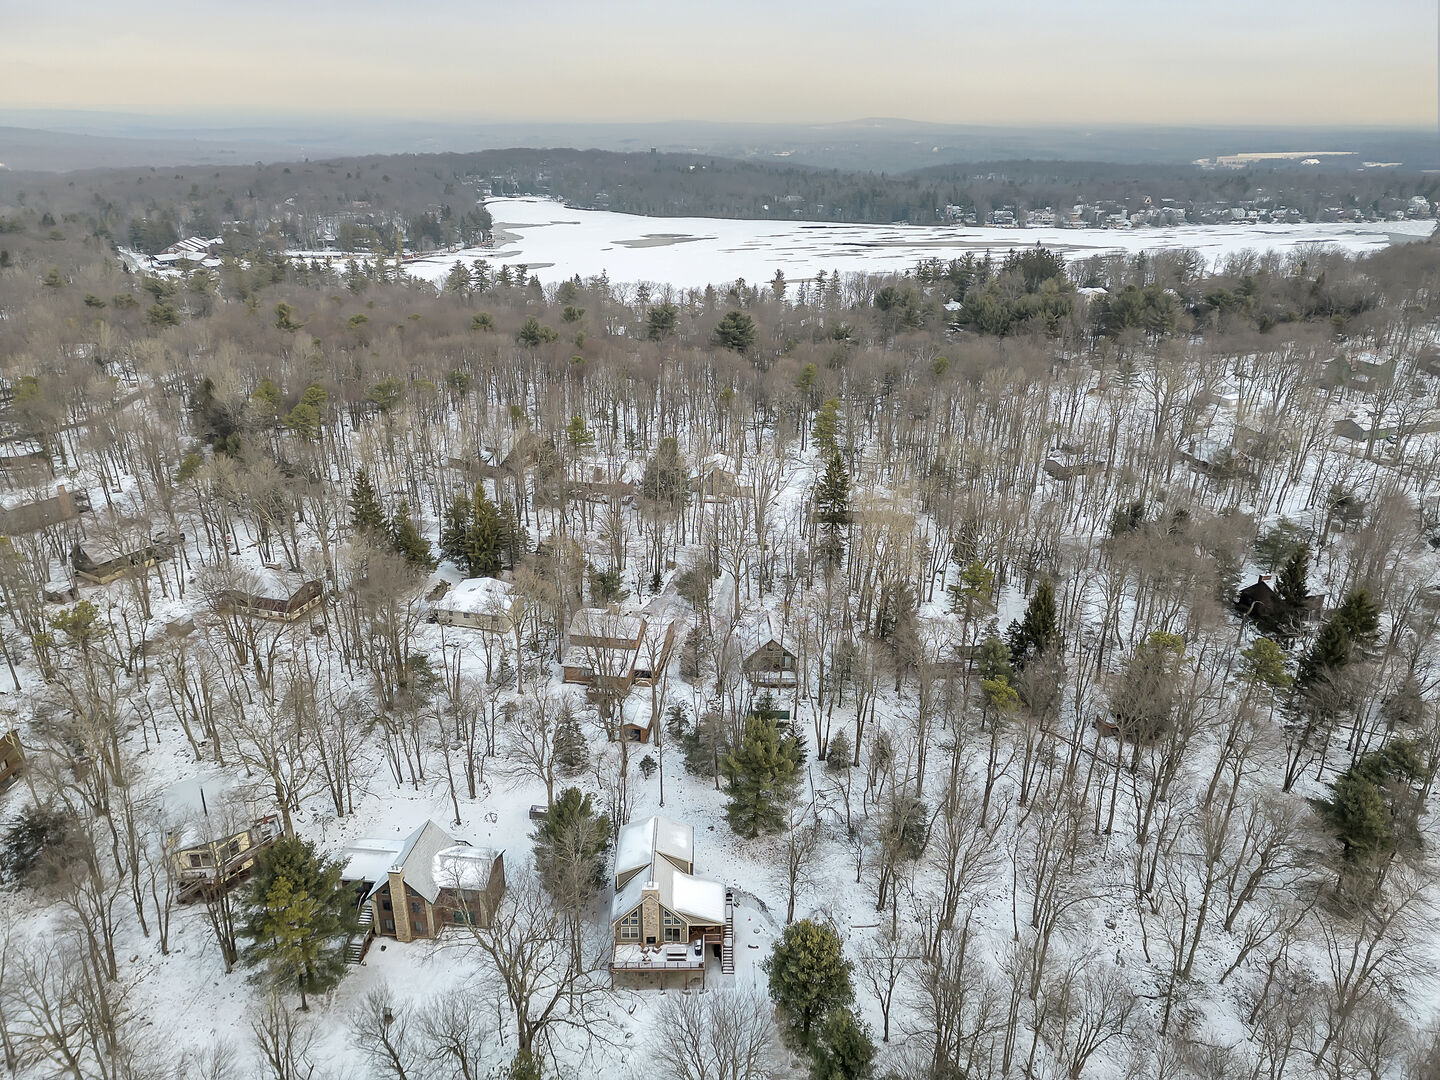 Ariel View of Lake Harmony in Winter